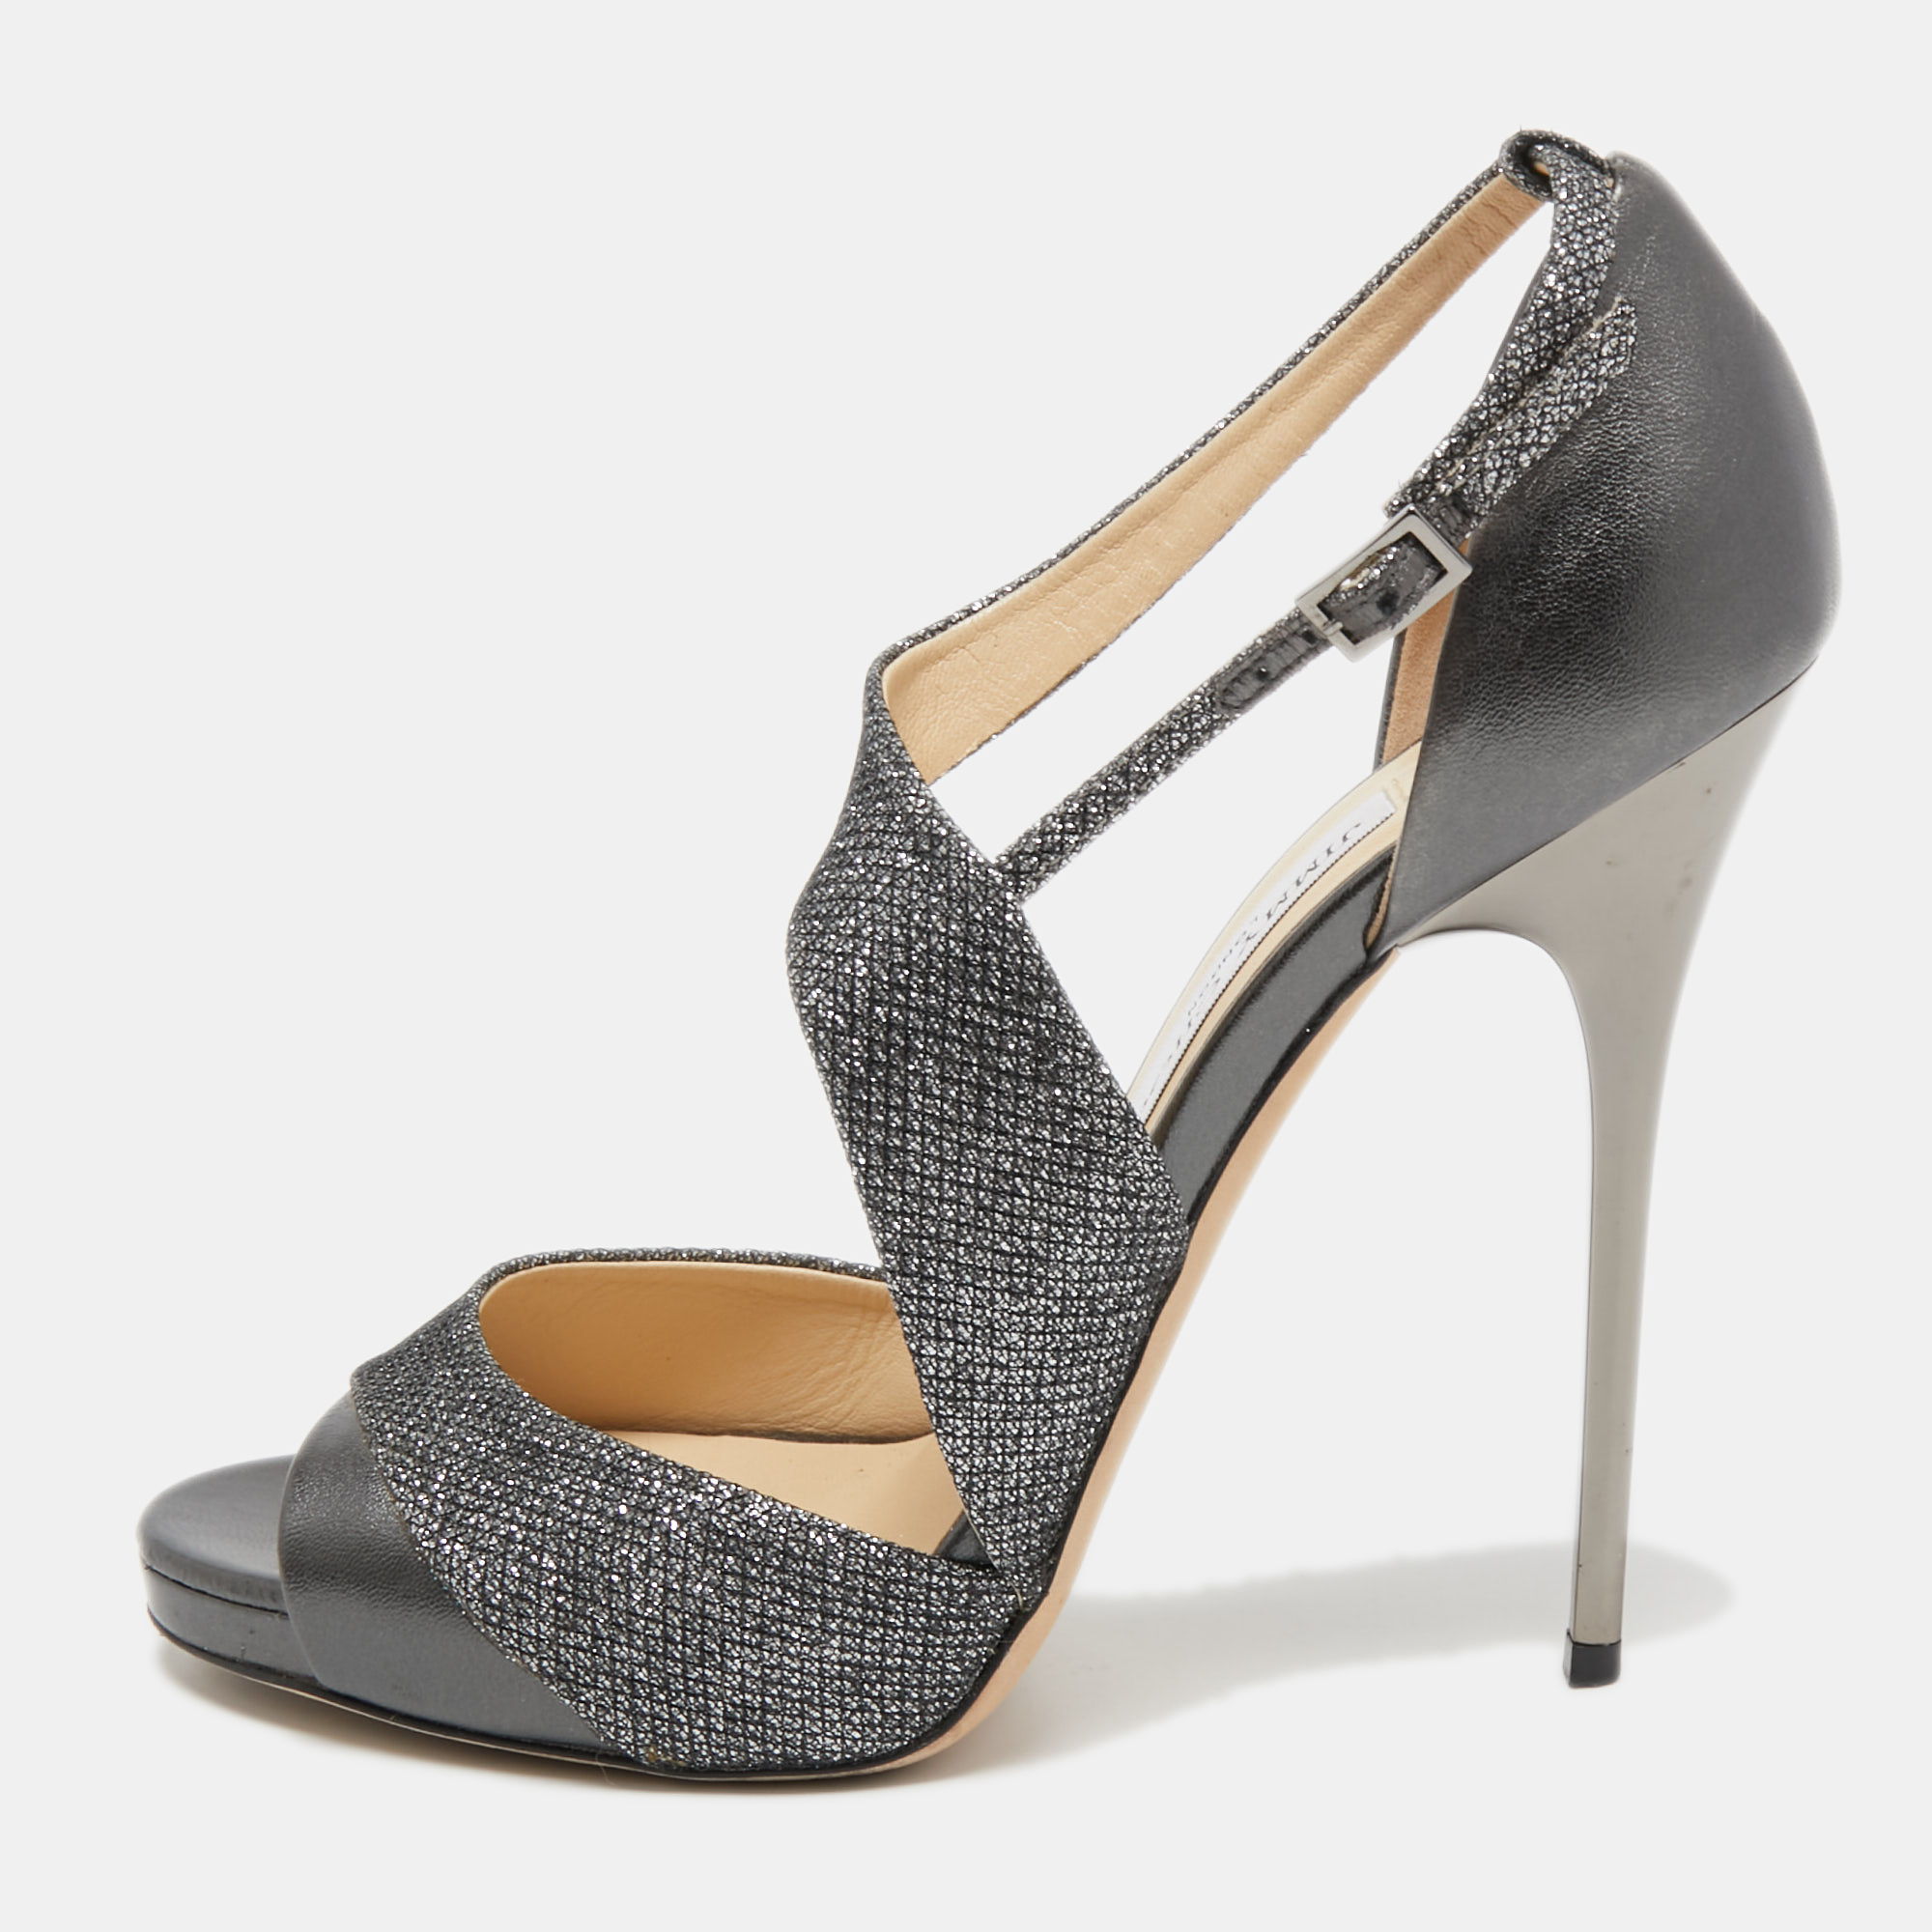 Pre-owned Jimmy Choo Metallic Grey Lurex Fabric And Leather Ankle Strap Sandals Size 39.5